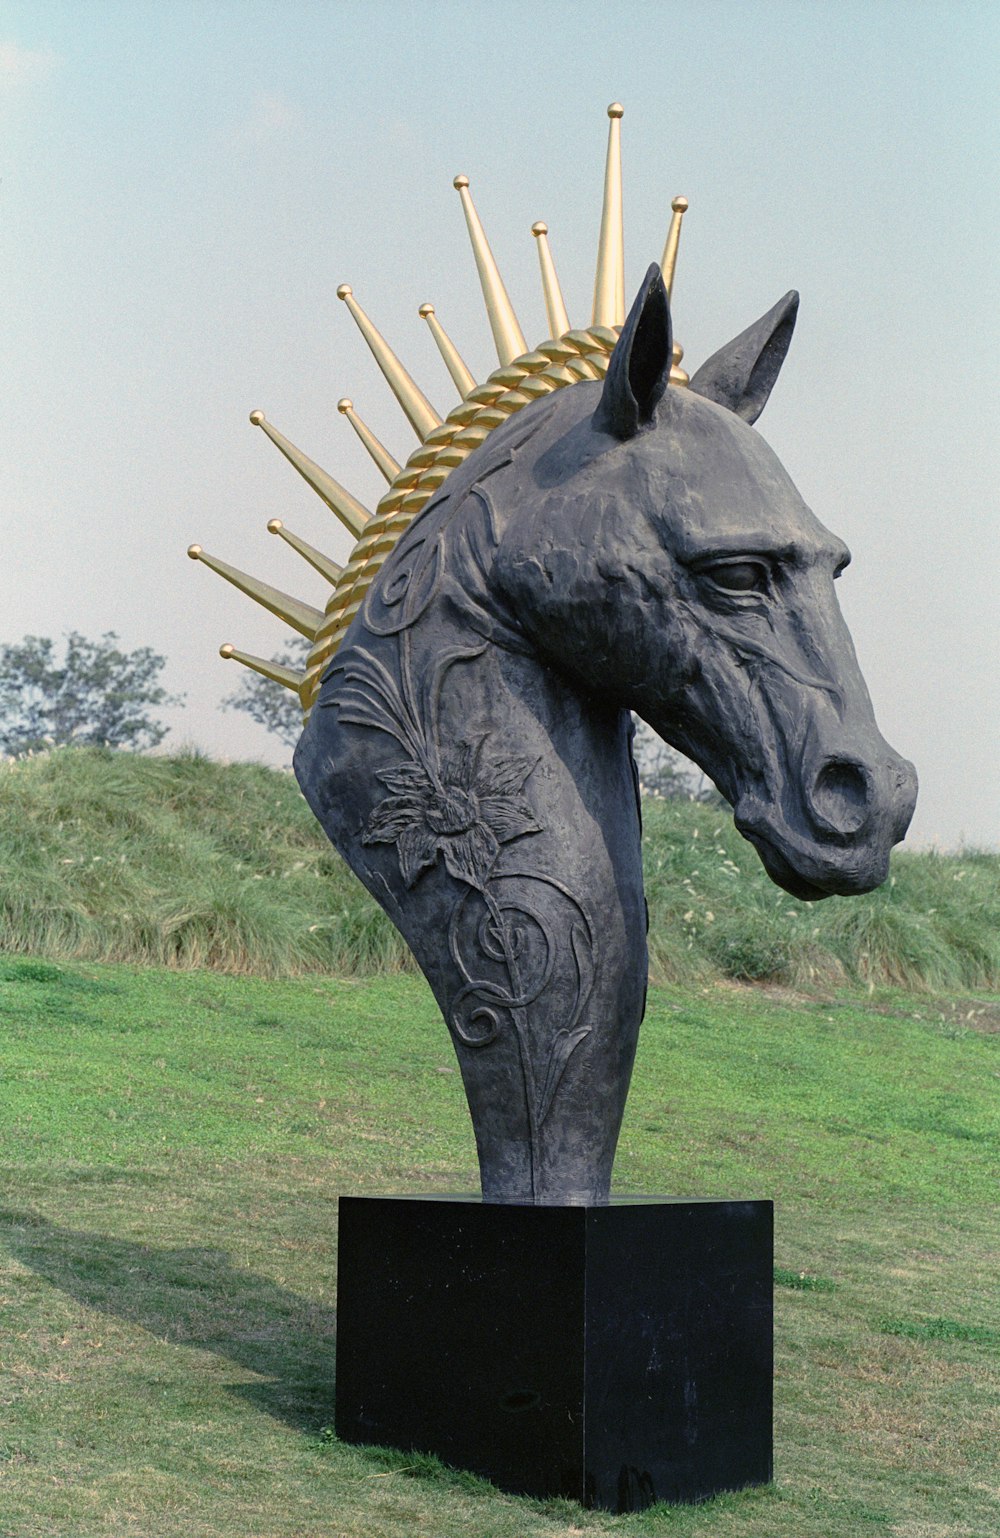 a statue of a horse with spikes on its head